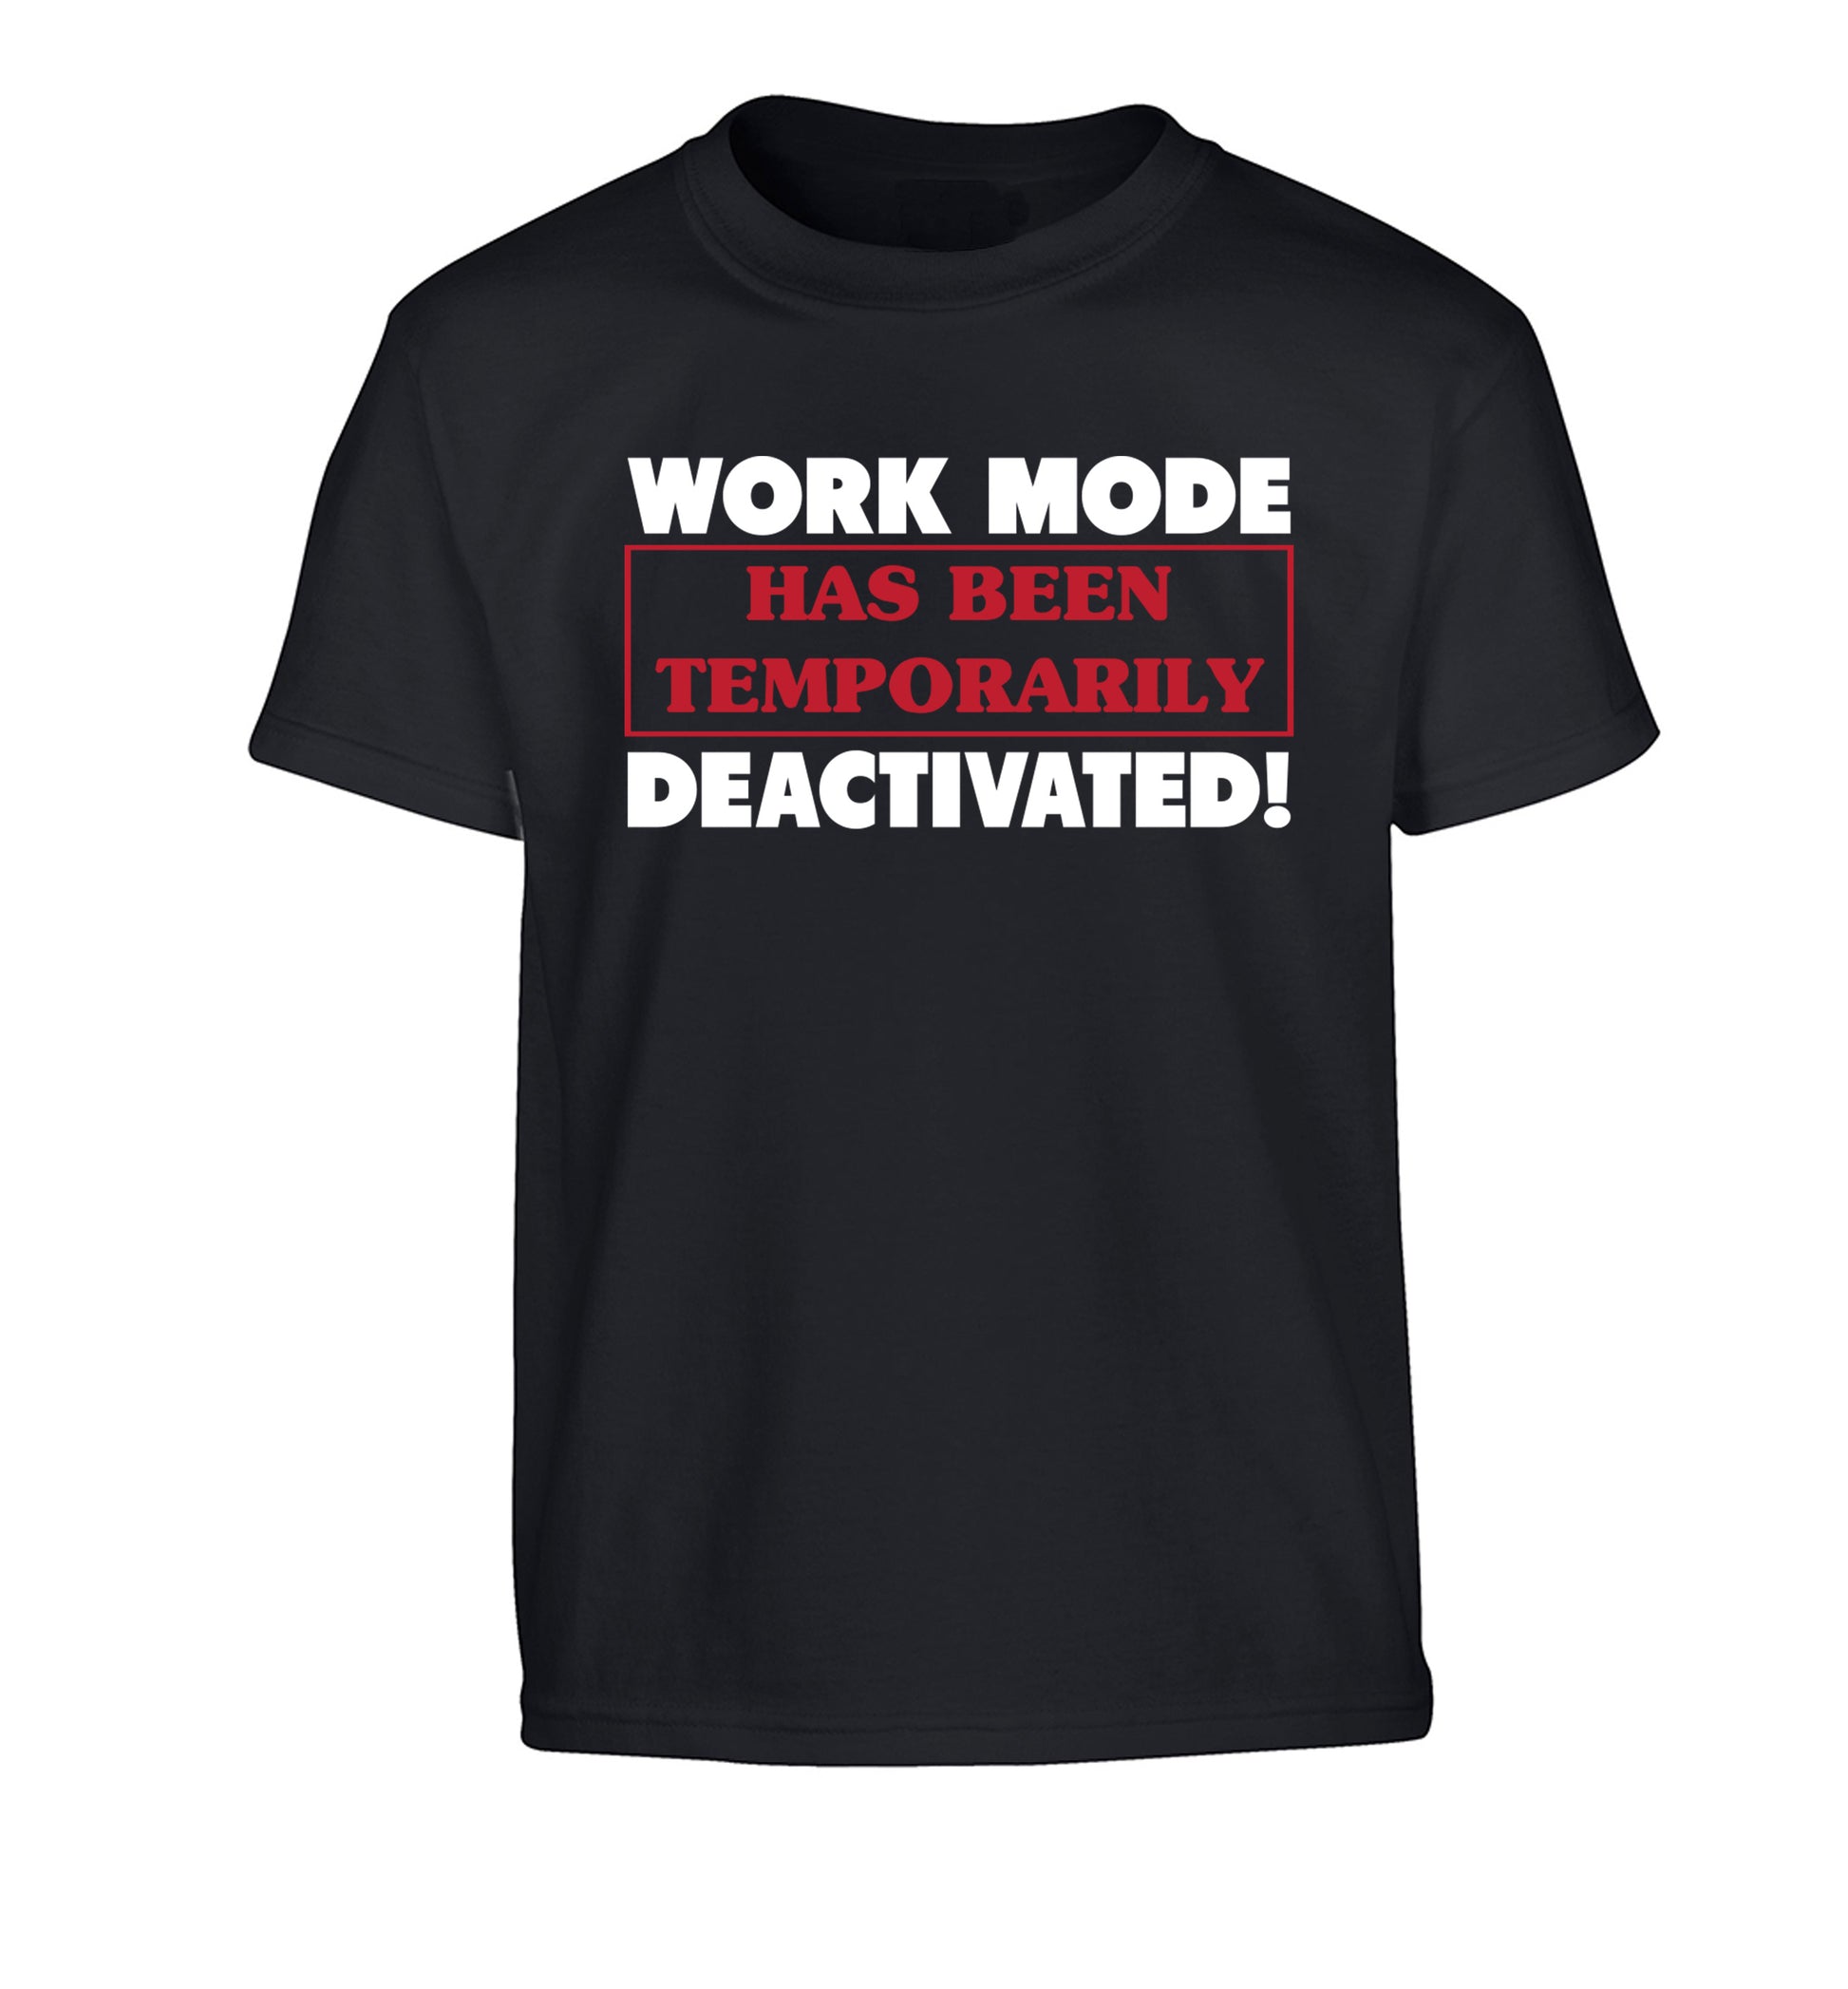 Work mode has now been temporarily deactivated Children's black Tshirt 12-13 Years